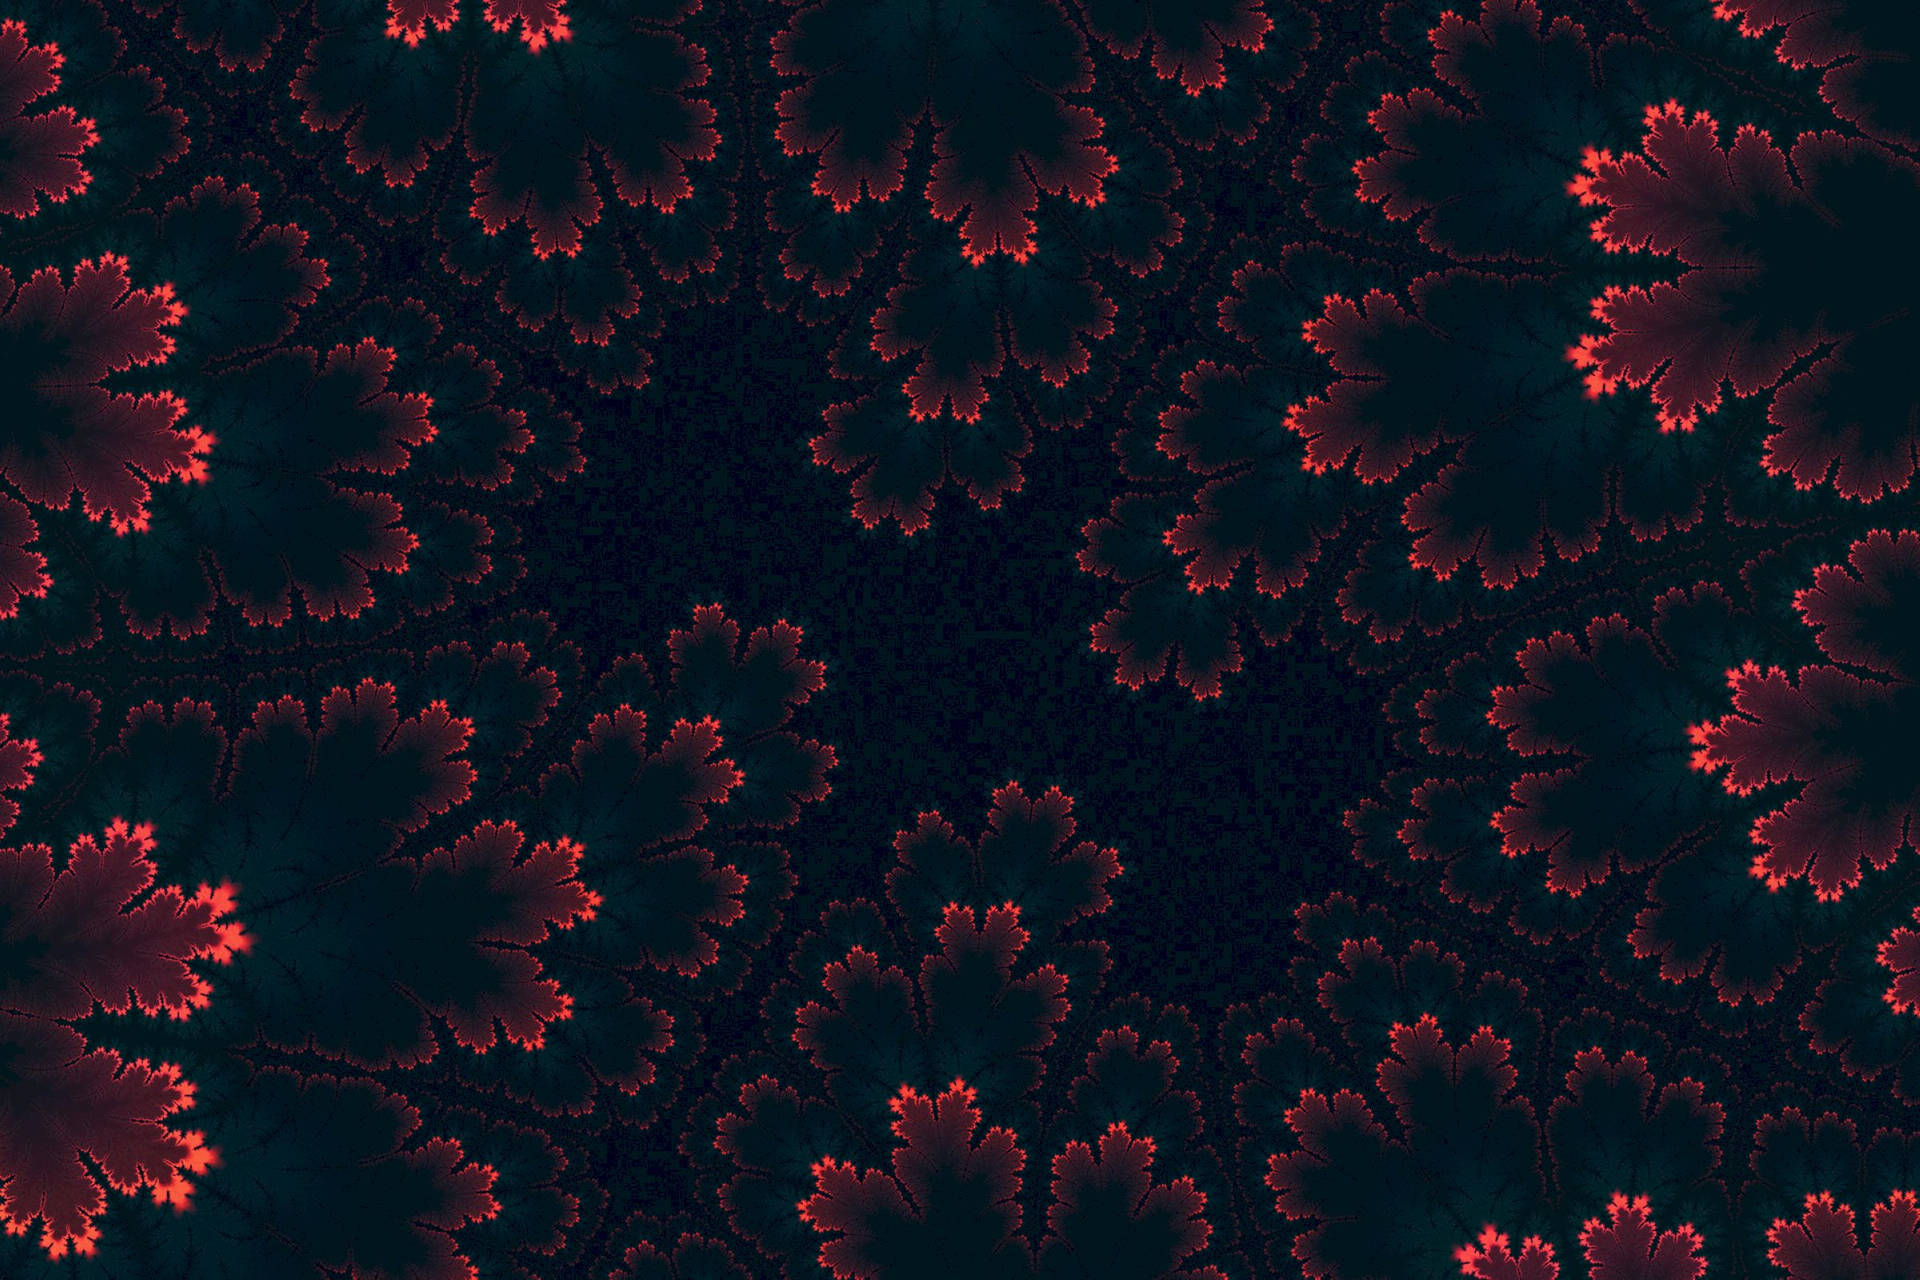 Ominous Red And Black Abstract Wallpaper